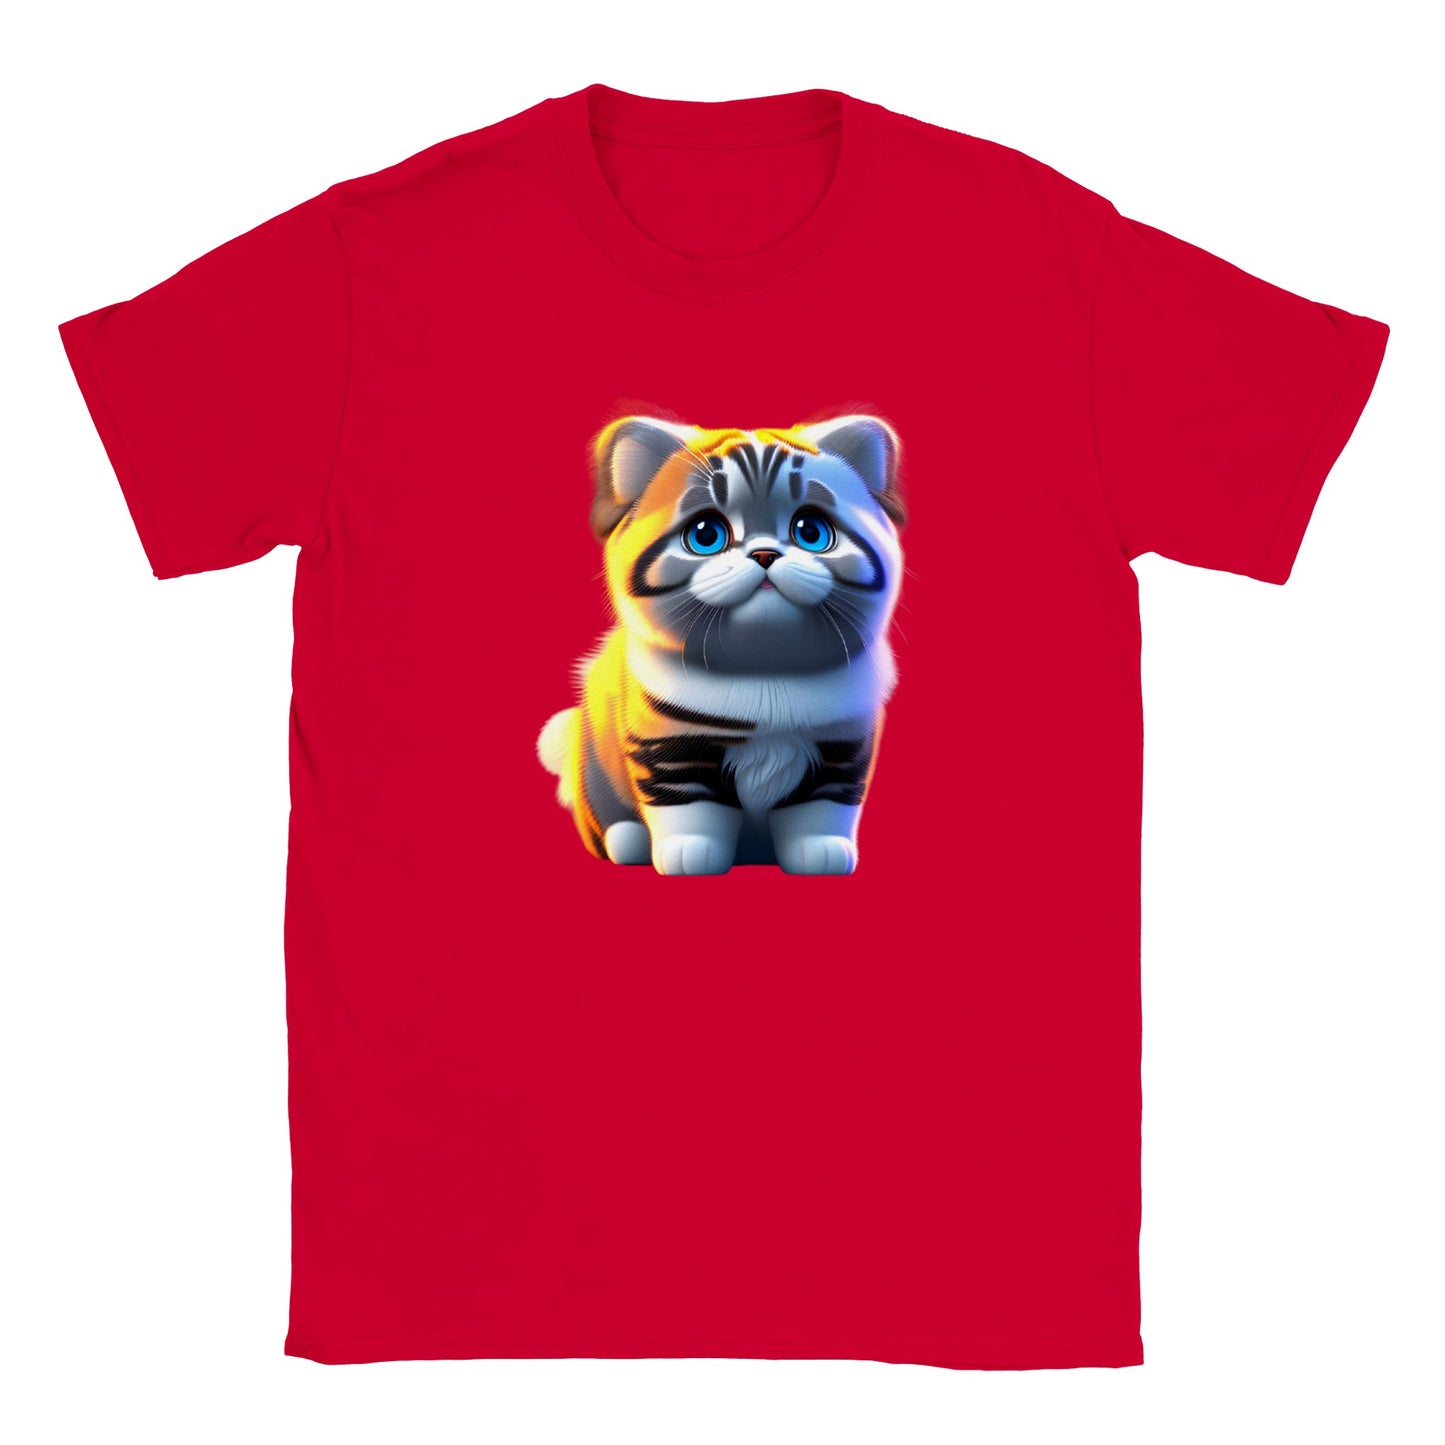 Adorable, Cool, Cute Cats and Kittens Toy - Classic Kids Crewneck T-Shirt 42